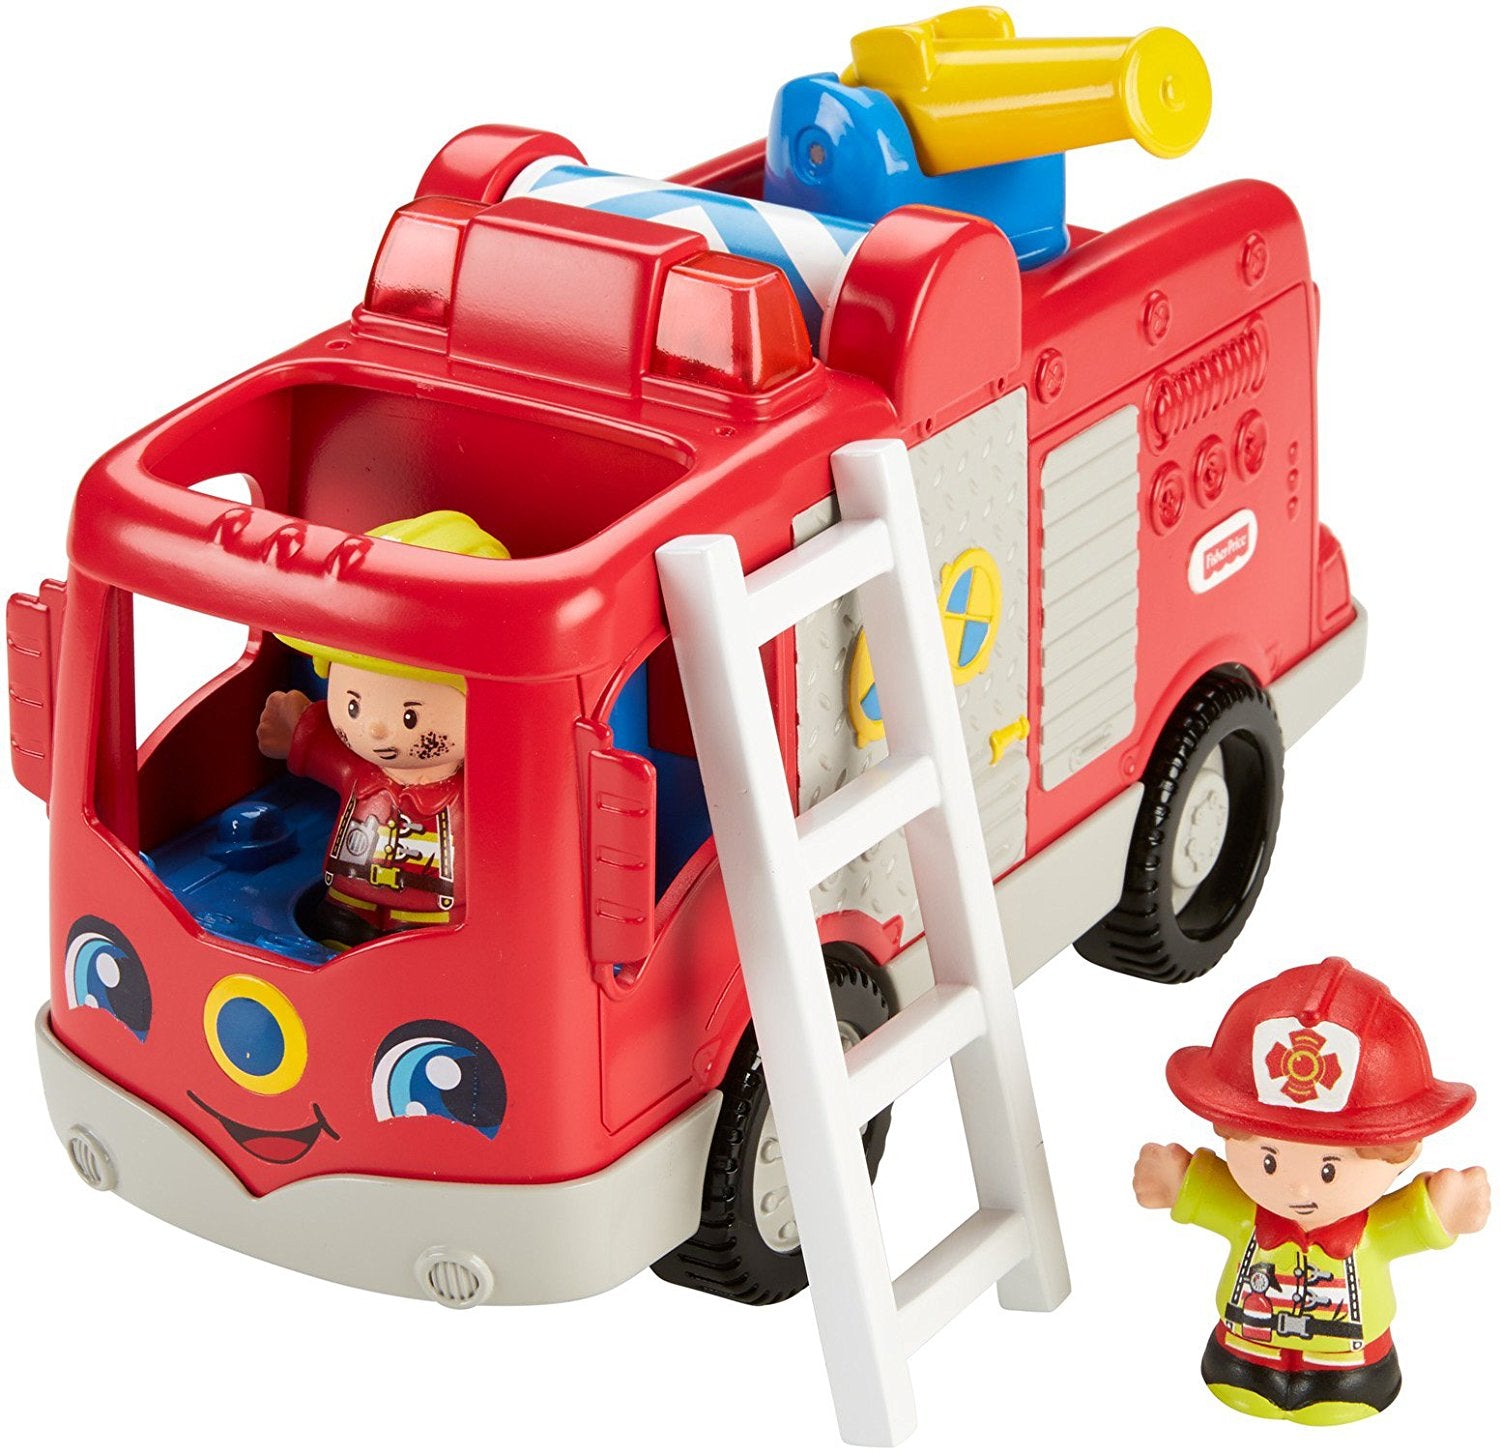 little people helping others fire truck